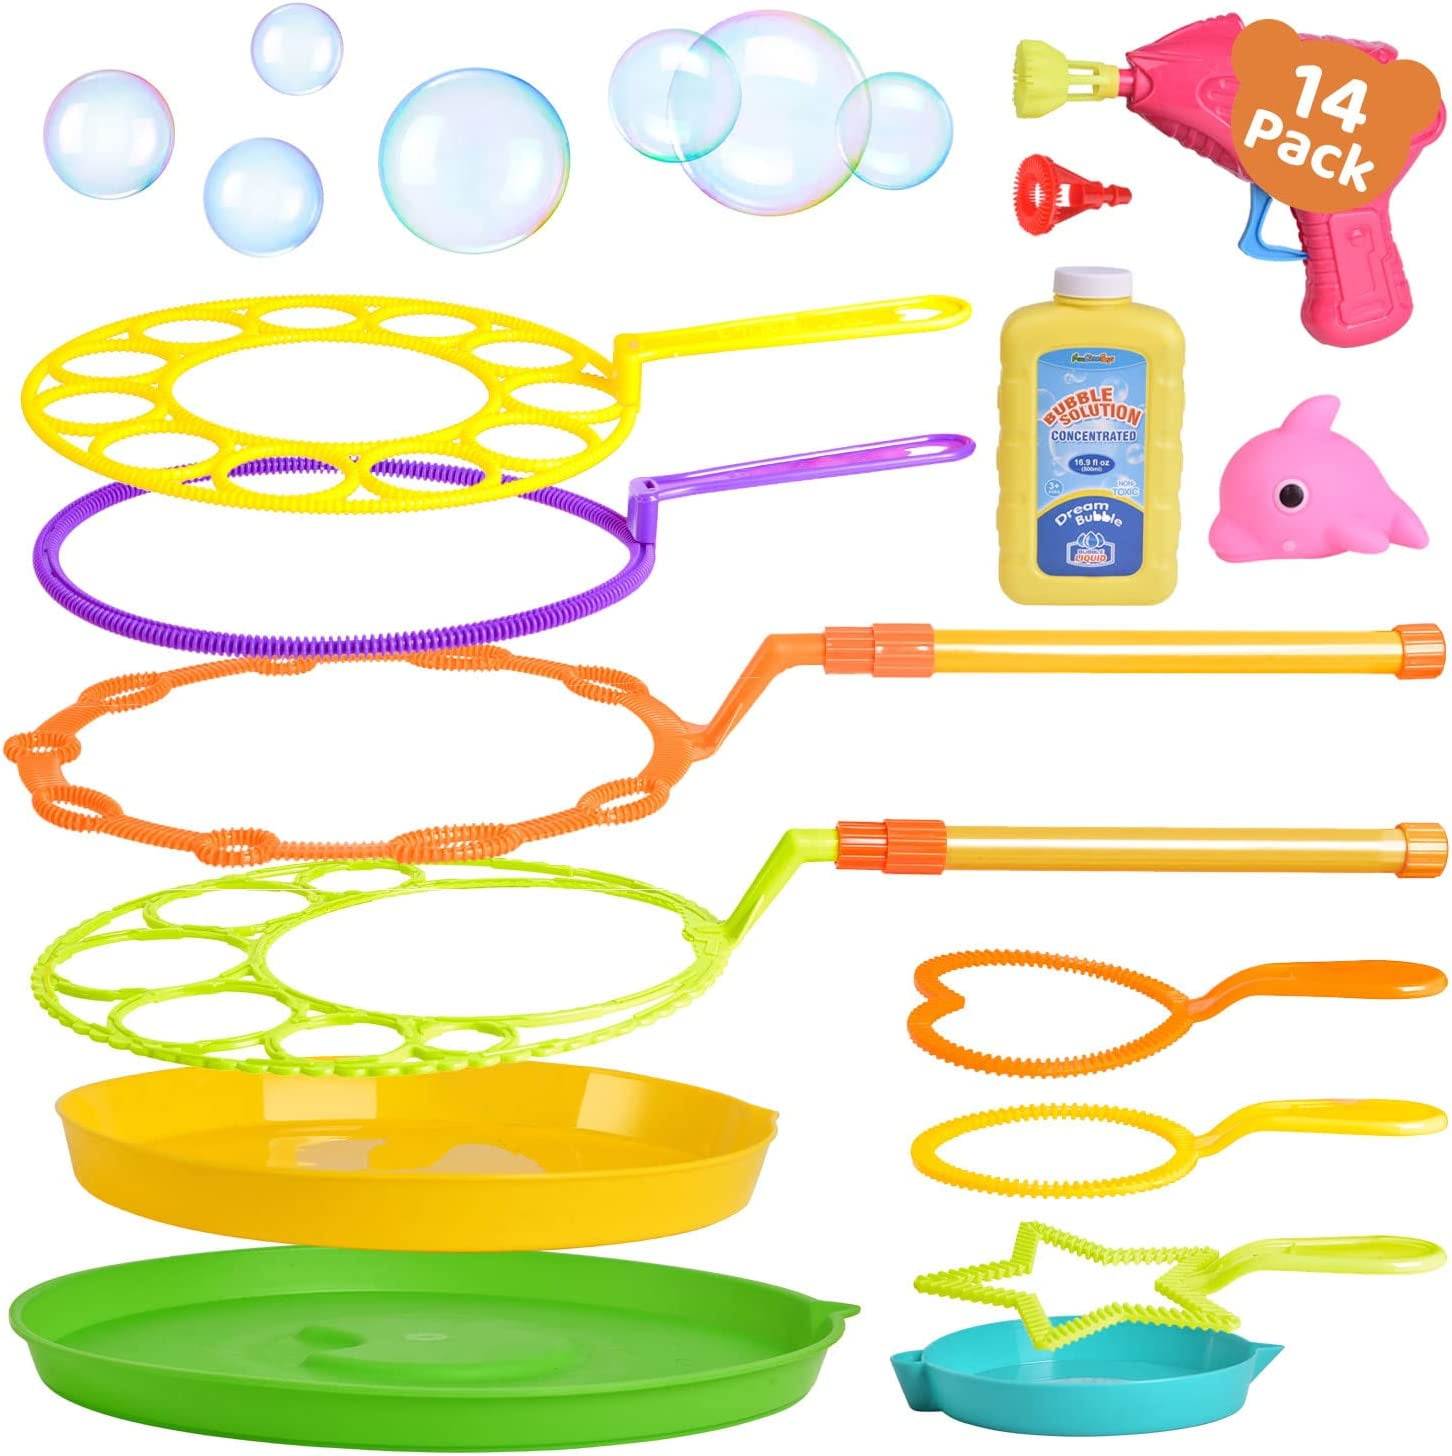 BestJoy Bubble Machine Gun for Kids - Bubble Blower Big Bubbles for  Toddlers 1-3, Fun Giant Bubble Wand Outdoor Toys for Kids Age 4-8, Large  Bubble